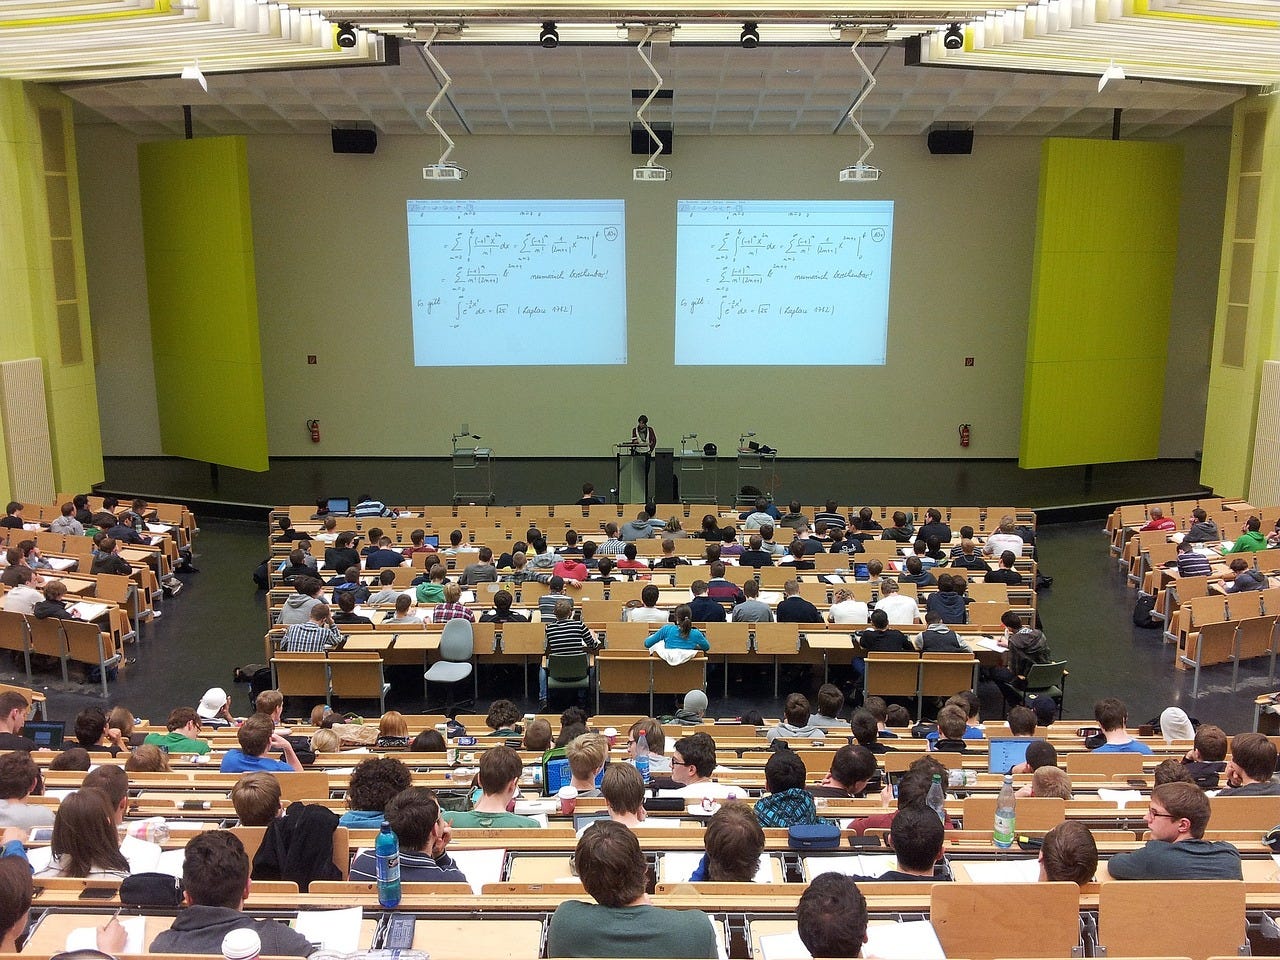 large auditorium style lecture hall with students